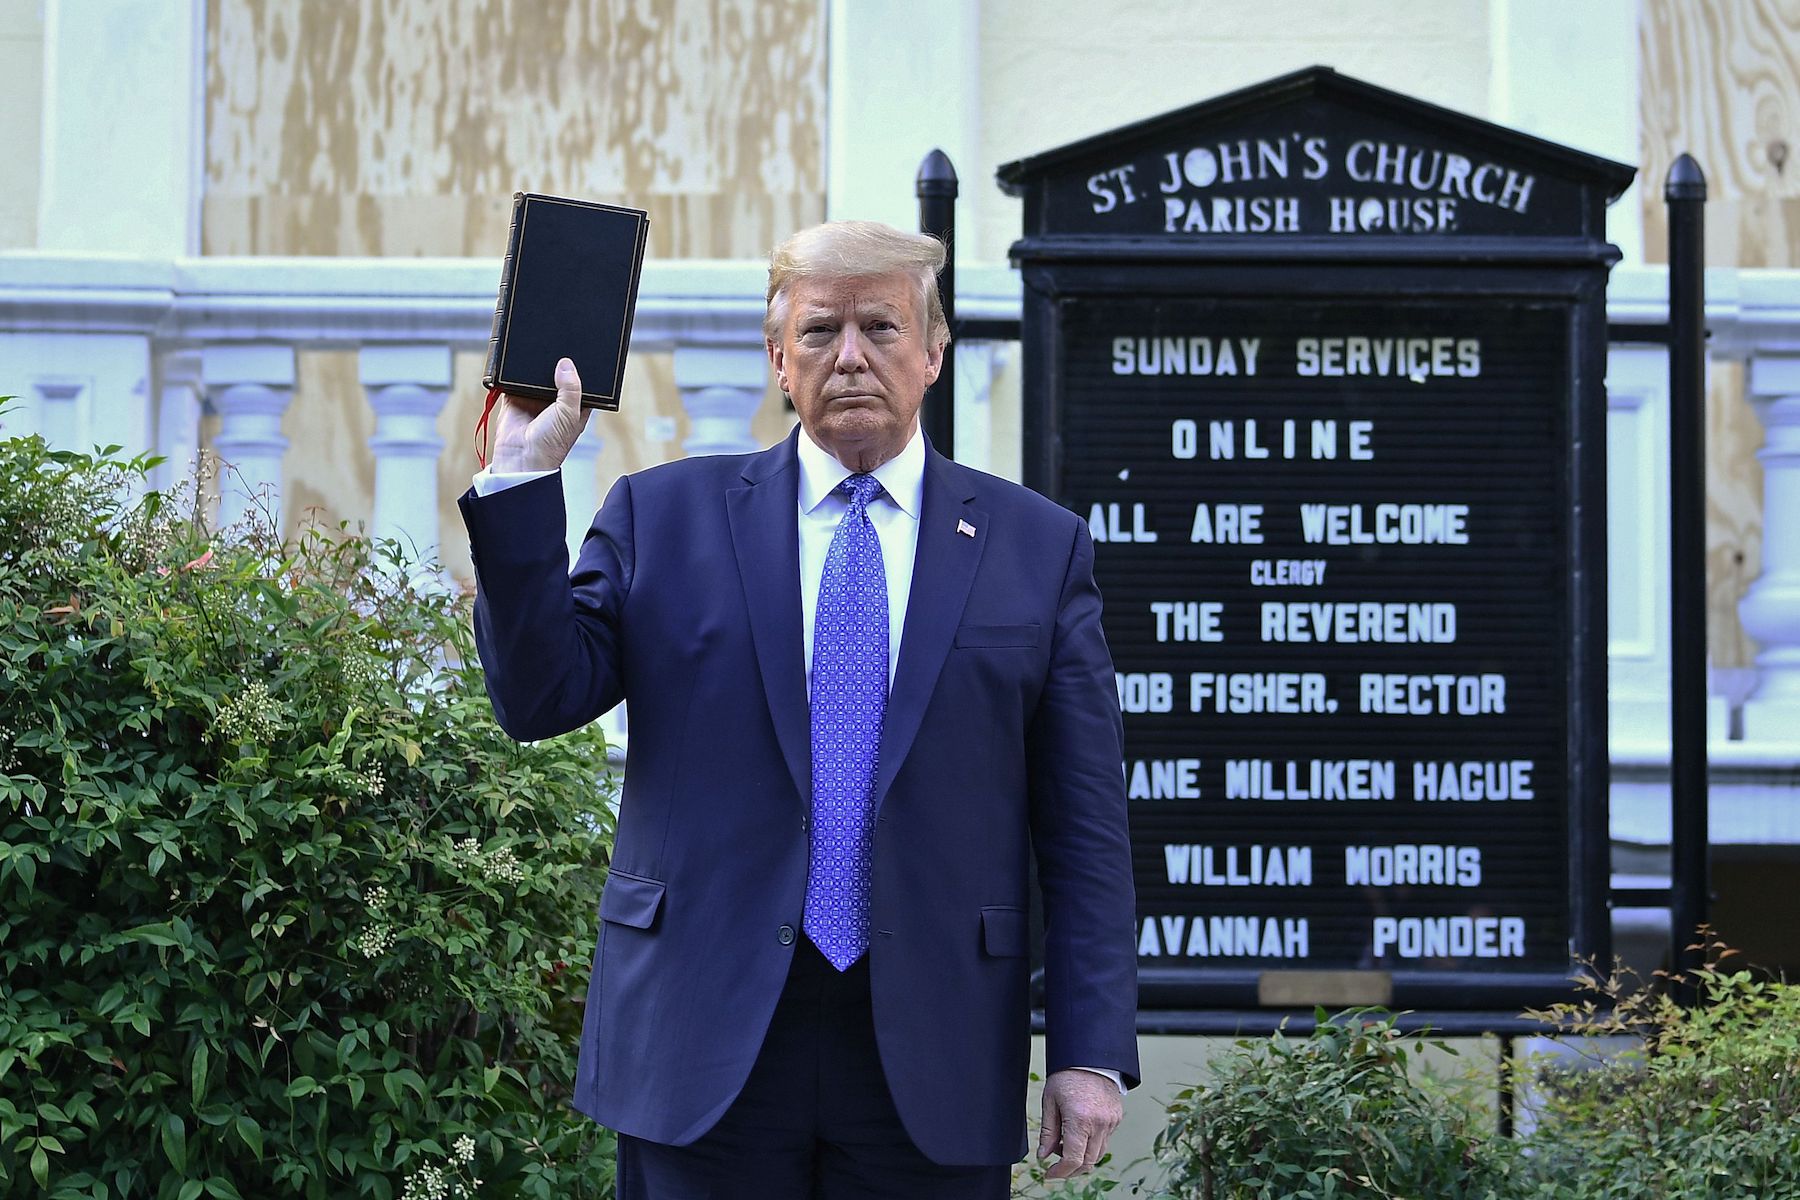 Trump's Freakish Church Photo Op and the Widespread Arrests of Journalists  Point to the Same Deeper Rot | artnet News